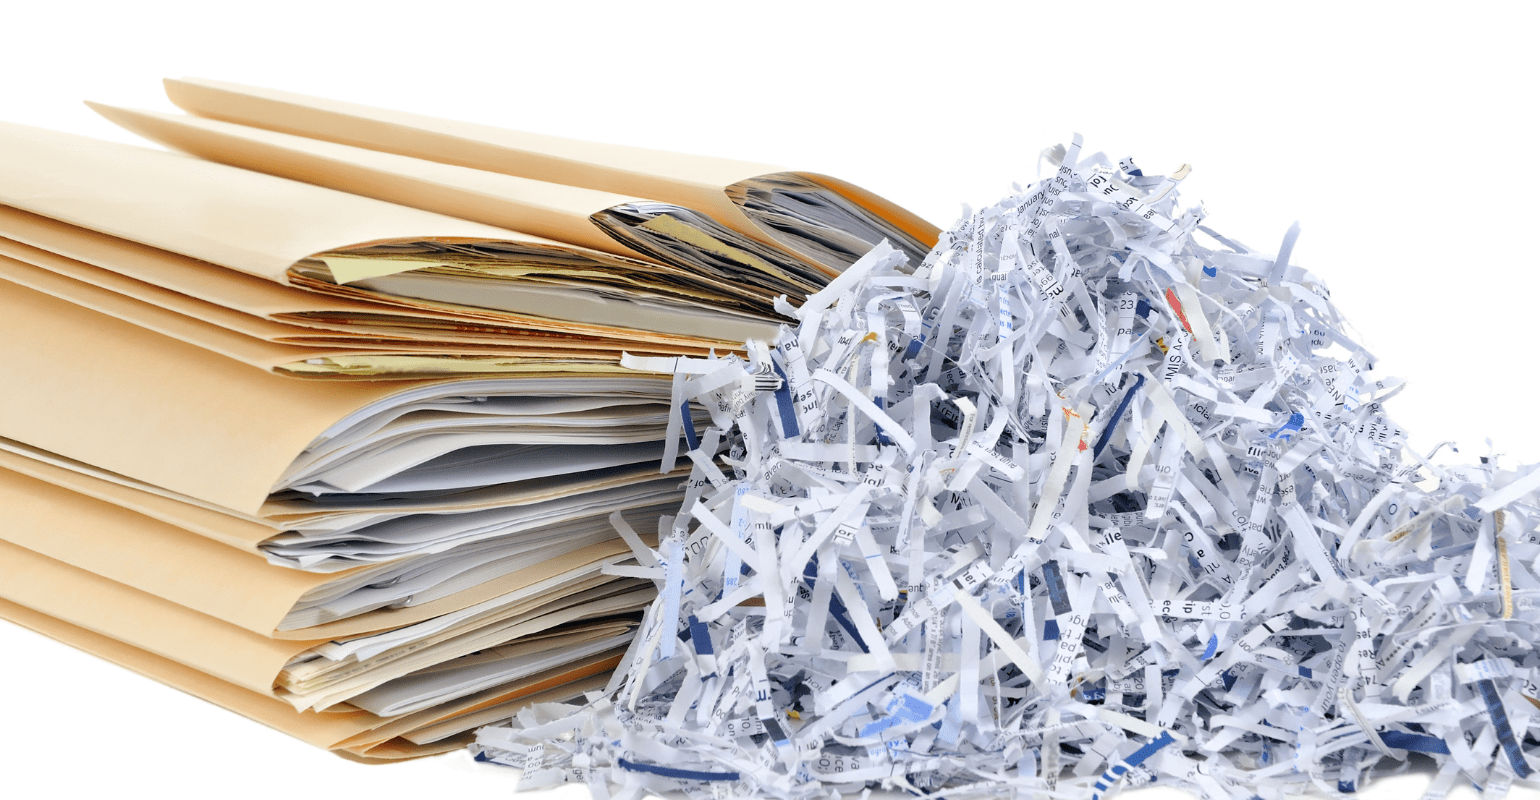 Witnessed Document Shredding Service in New Hampshire